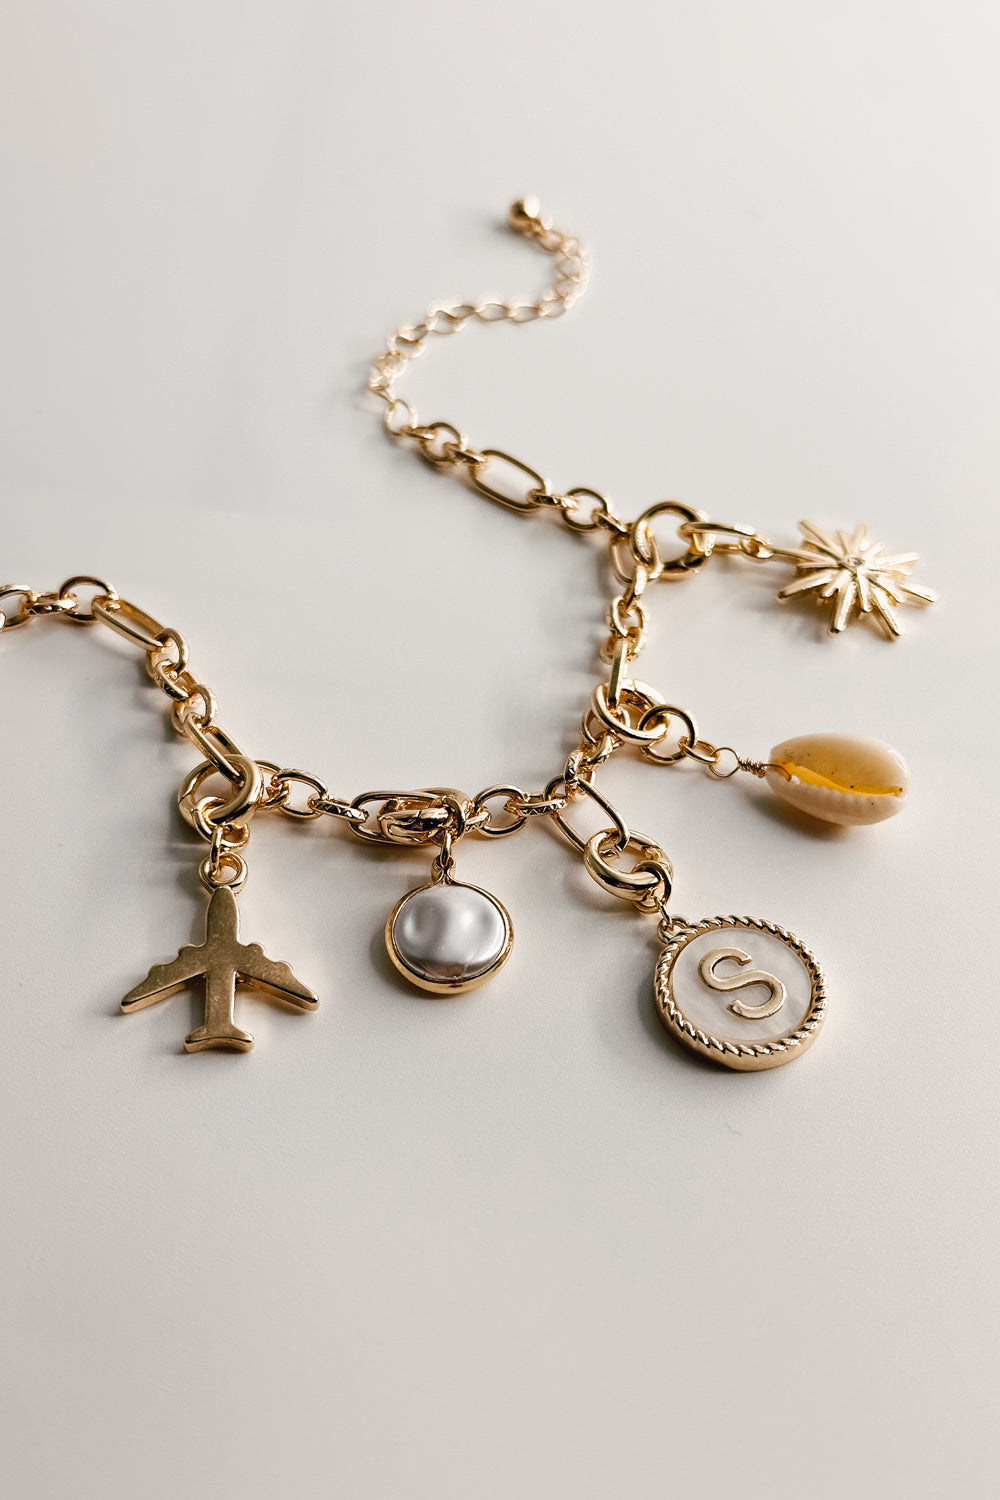 Image shows gold bracelet chain with airplane charm, pearl charm, S letter charm, shell charm, and starburst charm. Shown against a white background.